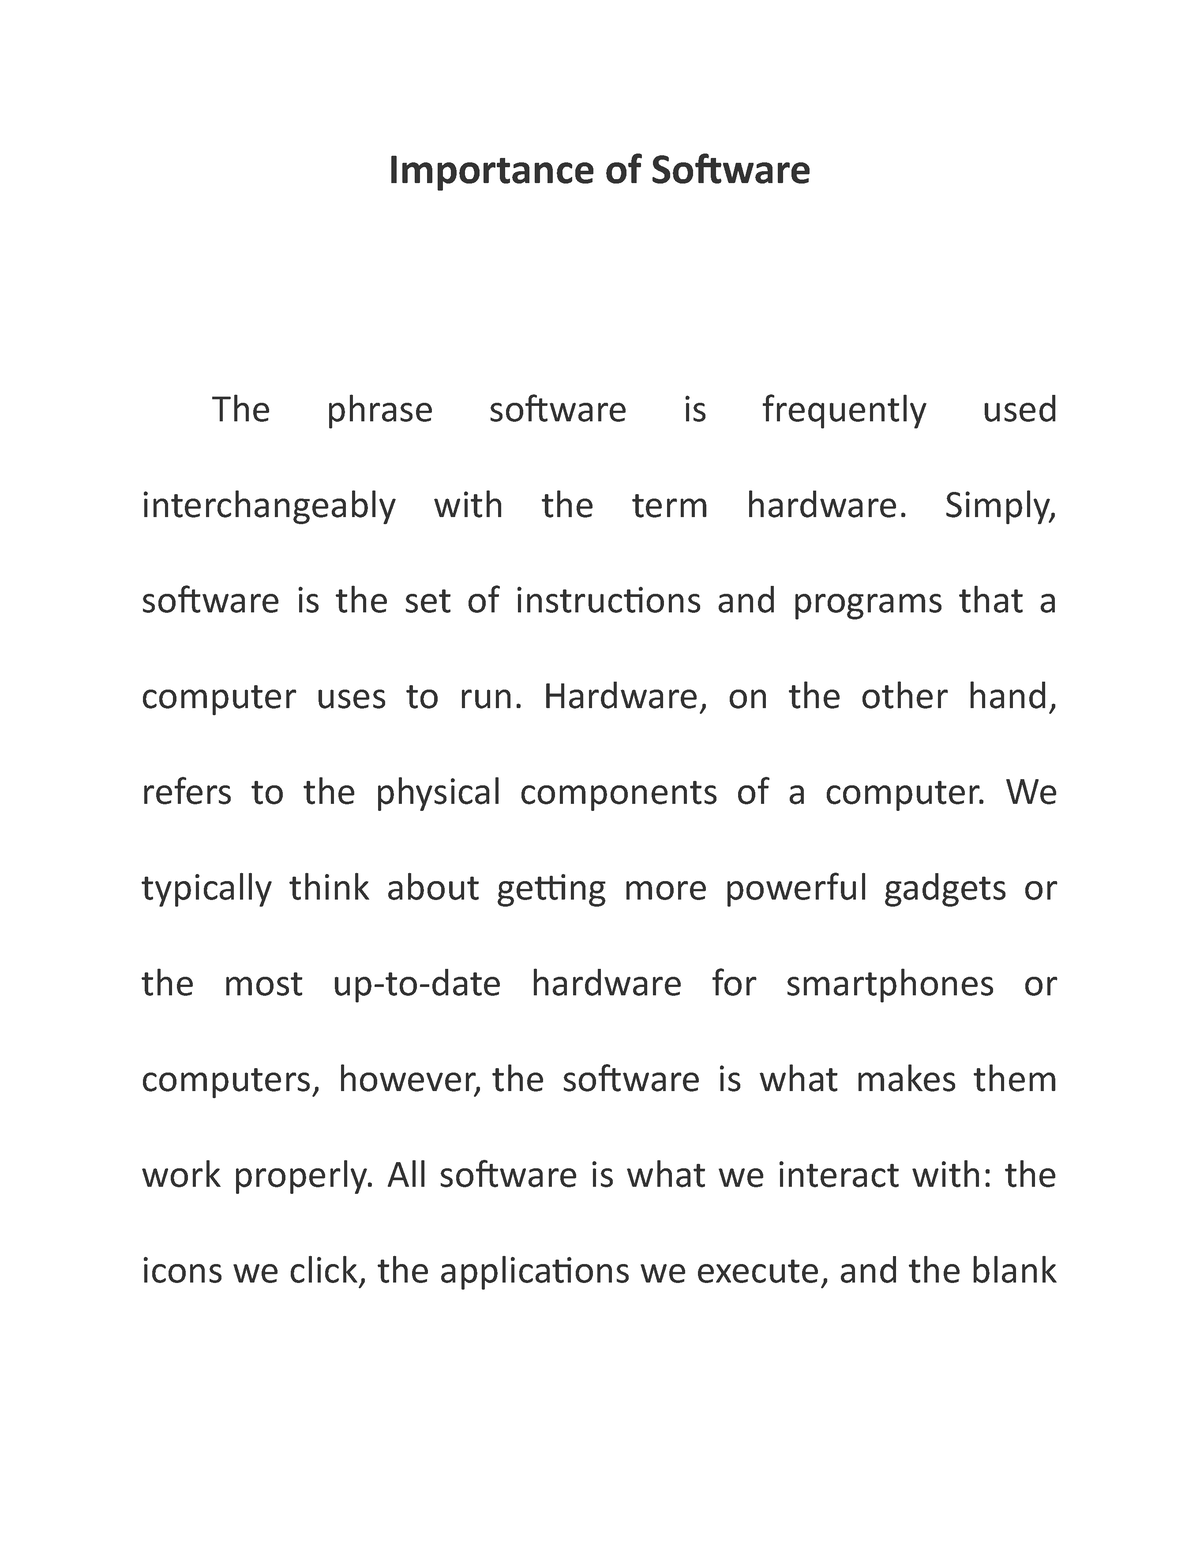 essay about software